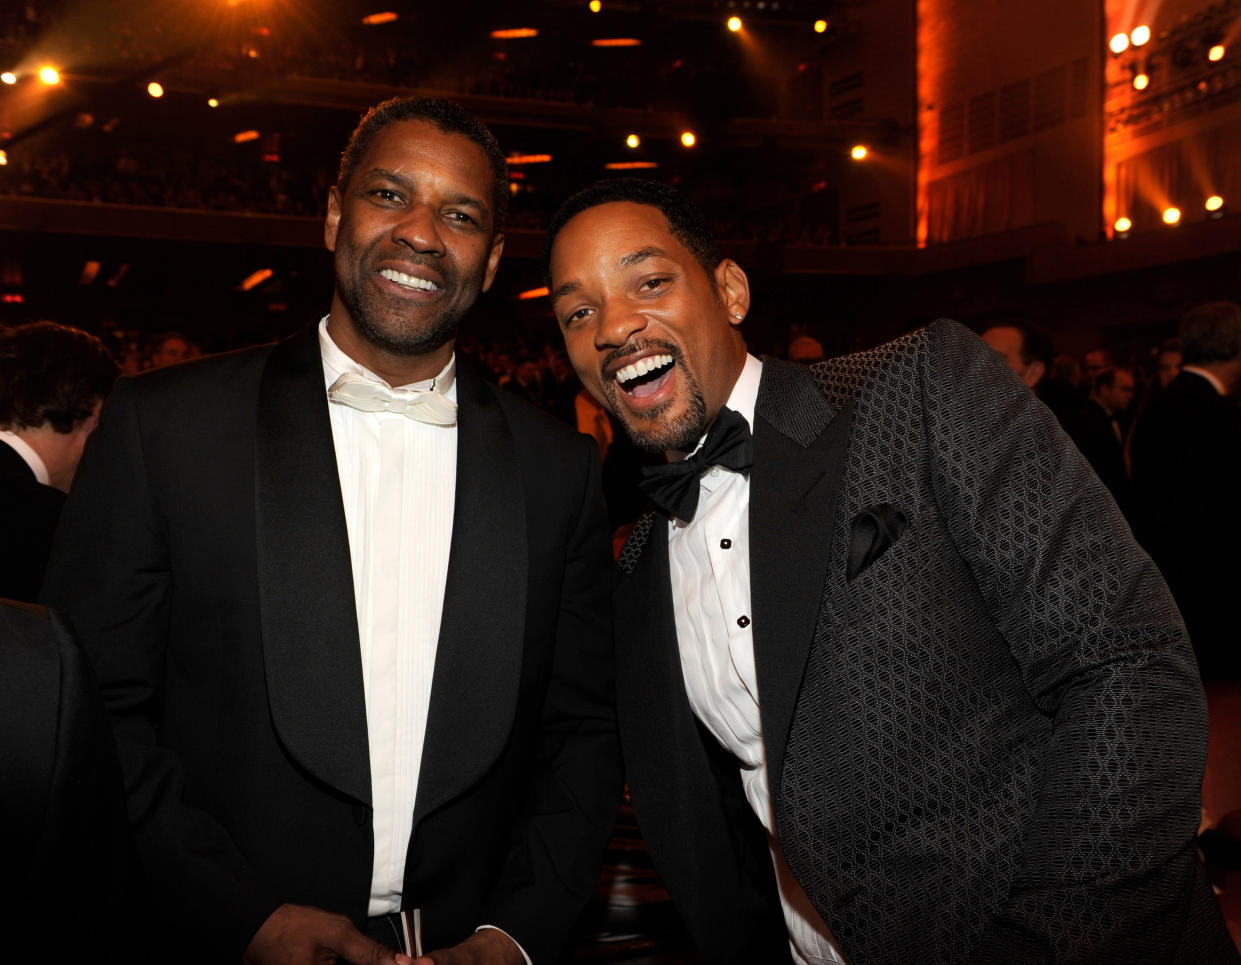 Denzel Washington, 67, is speaking out about Will Smith smacking Chris Rock at the Academy Awards on Sunday evening. (Photo: Kevin Mazur/WireImage)